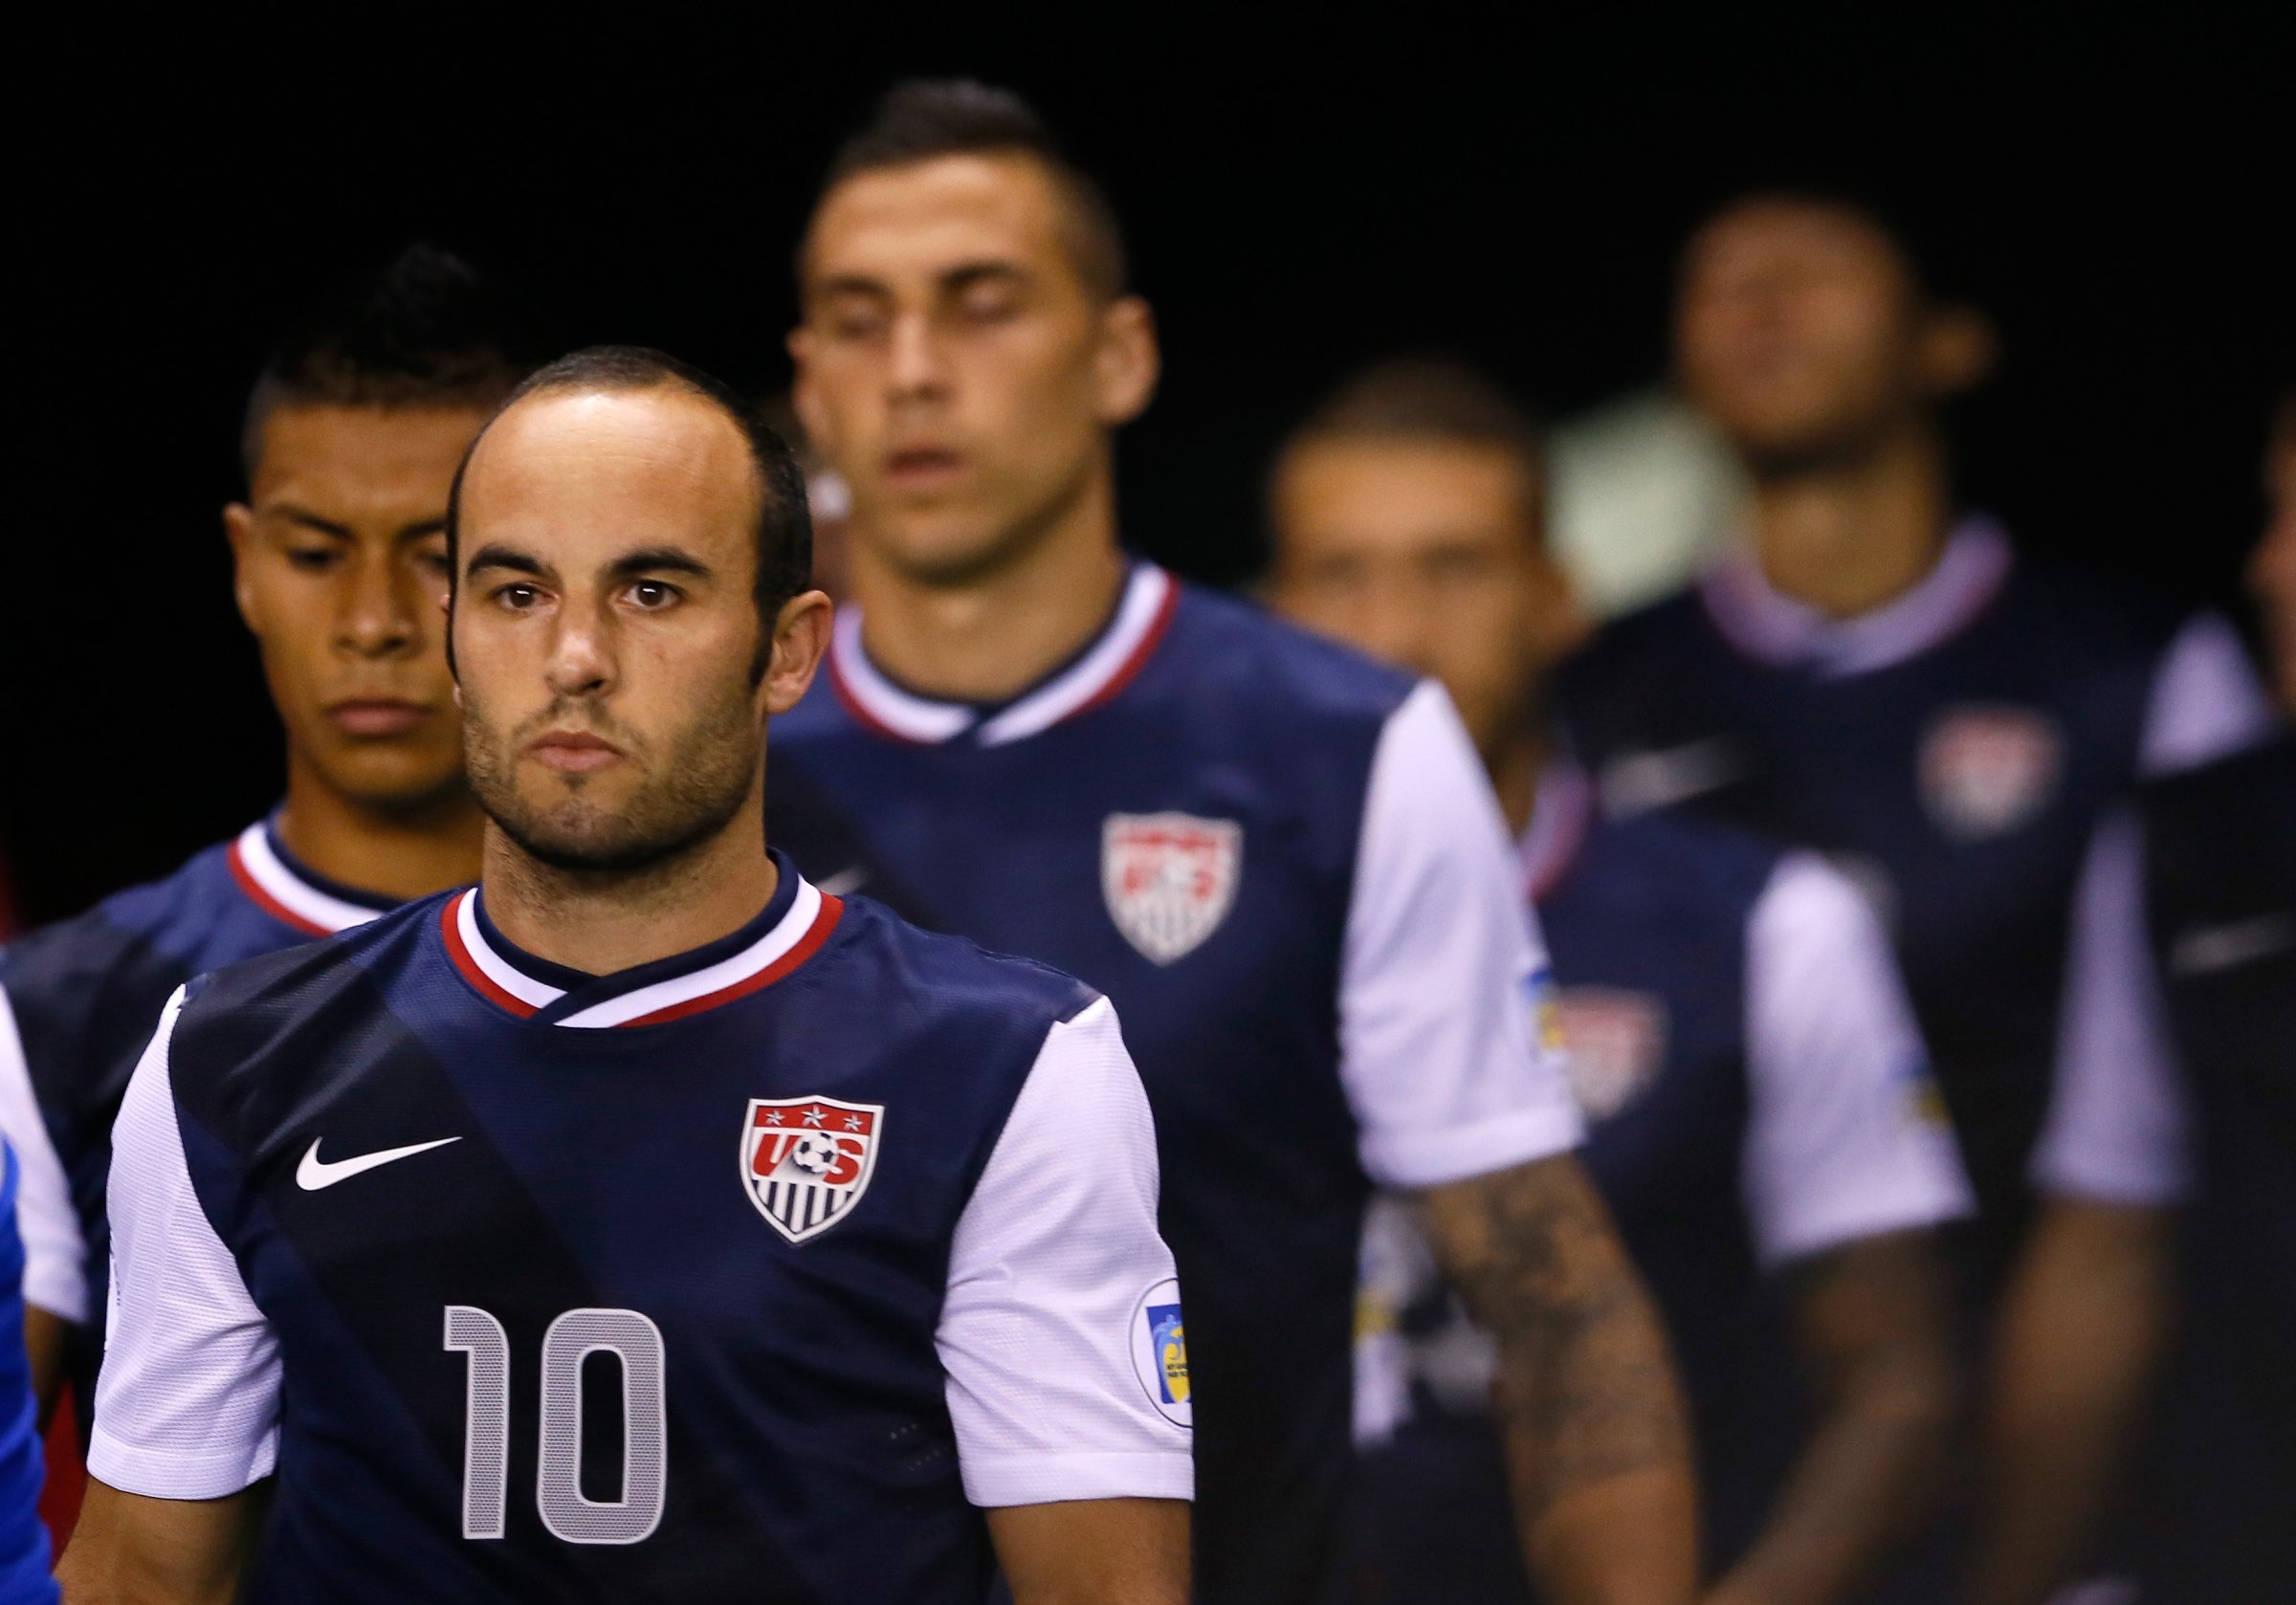 Landon Donovon prepares to play against Costa Rica during the 2014 World Cup Qualifier at Estadio Nacional on Sept. 6, 2013 in San Jose, Costa Rica.